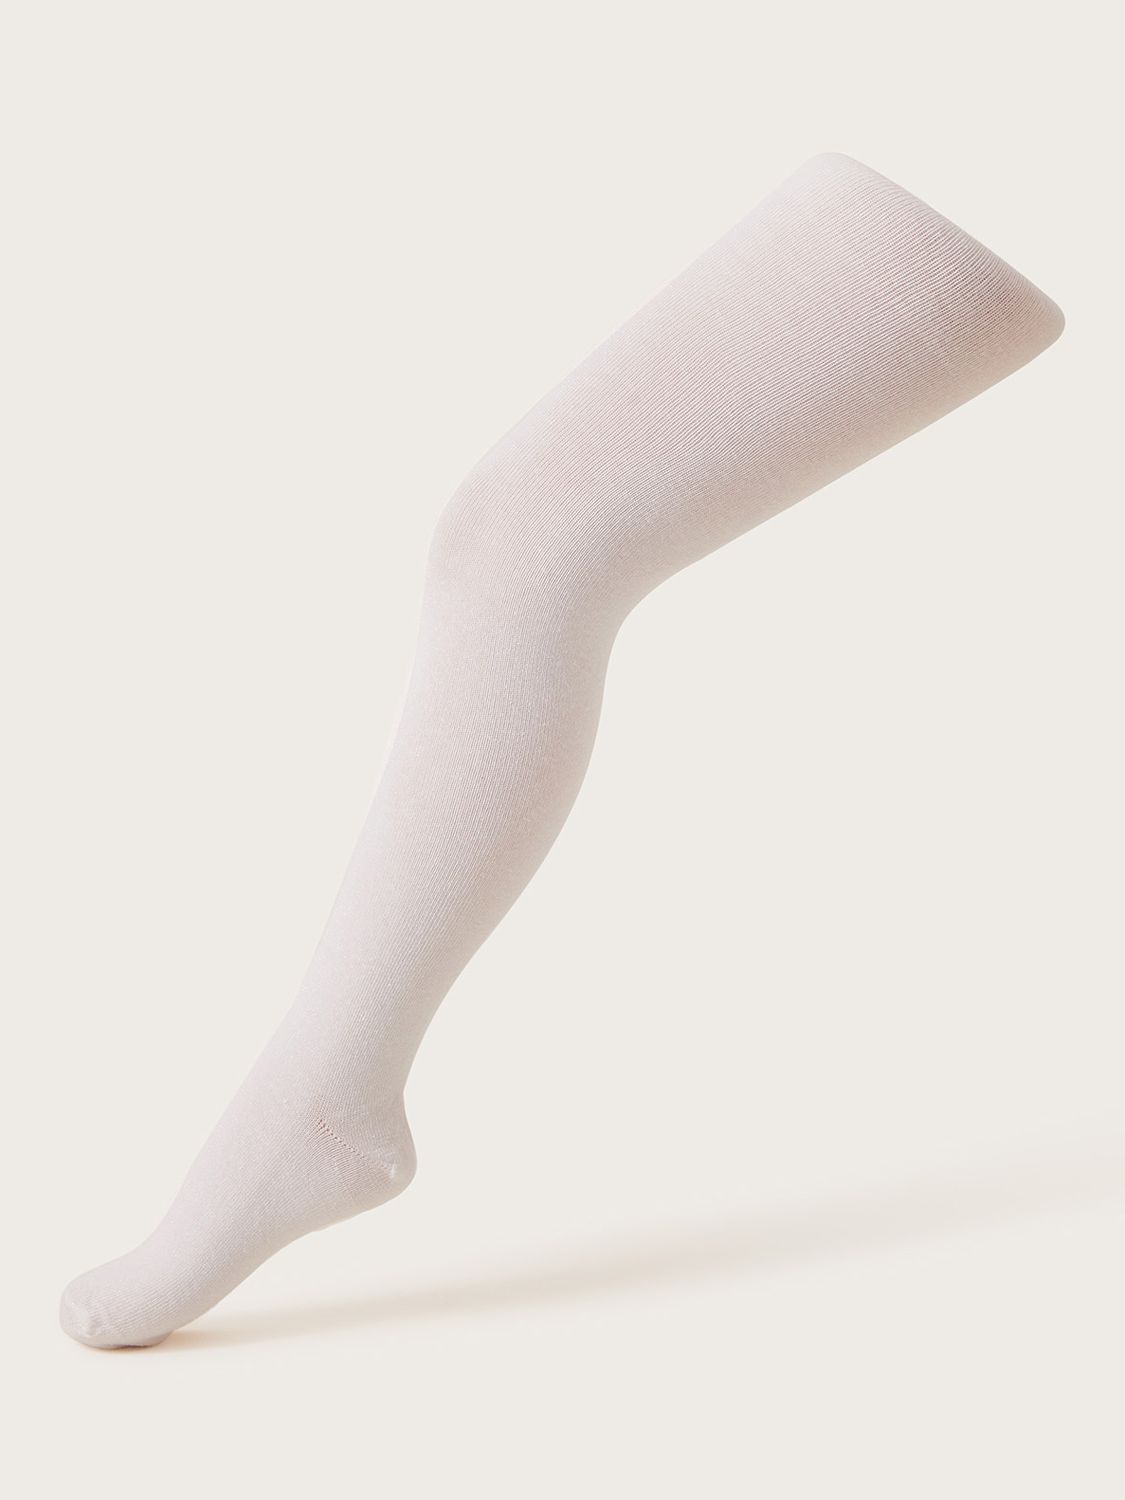 Monsoon Kids' Frosted Tights, Ivory, 3-4 years